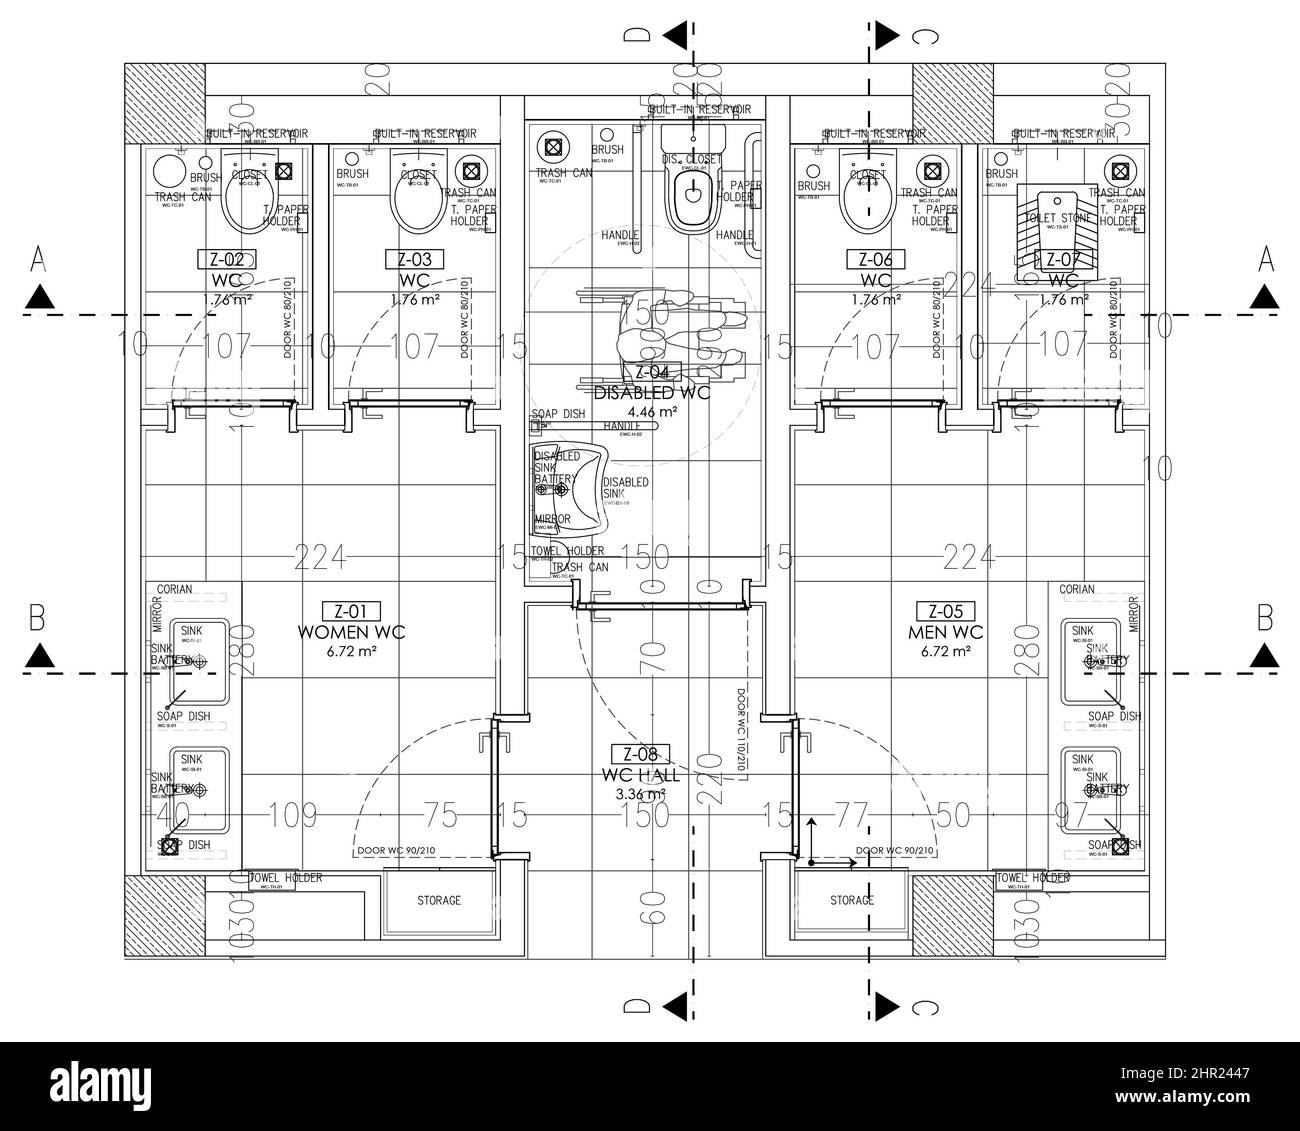 Floor plan design of a public wc, detailed technical drawing of public restroom project, architectural floor plan layout, 2d top view blueprint, CAD Stock Photo